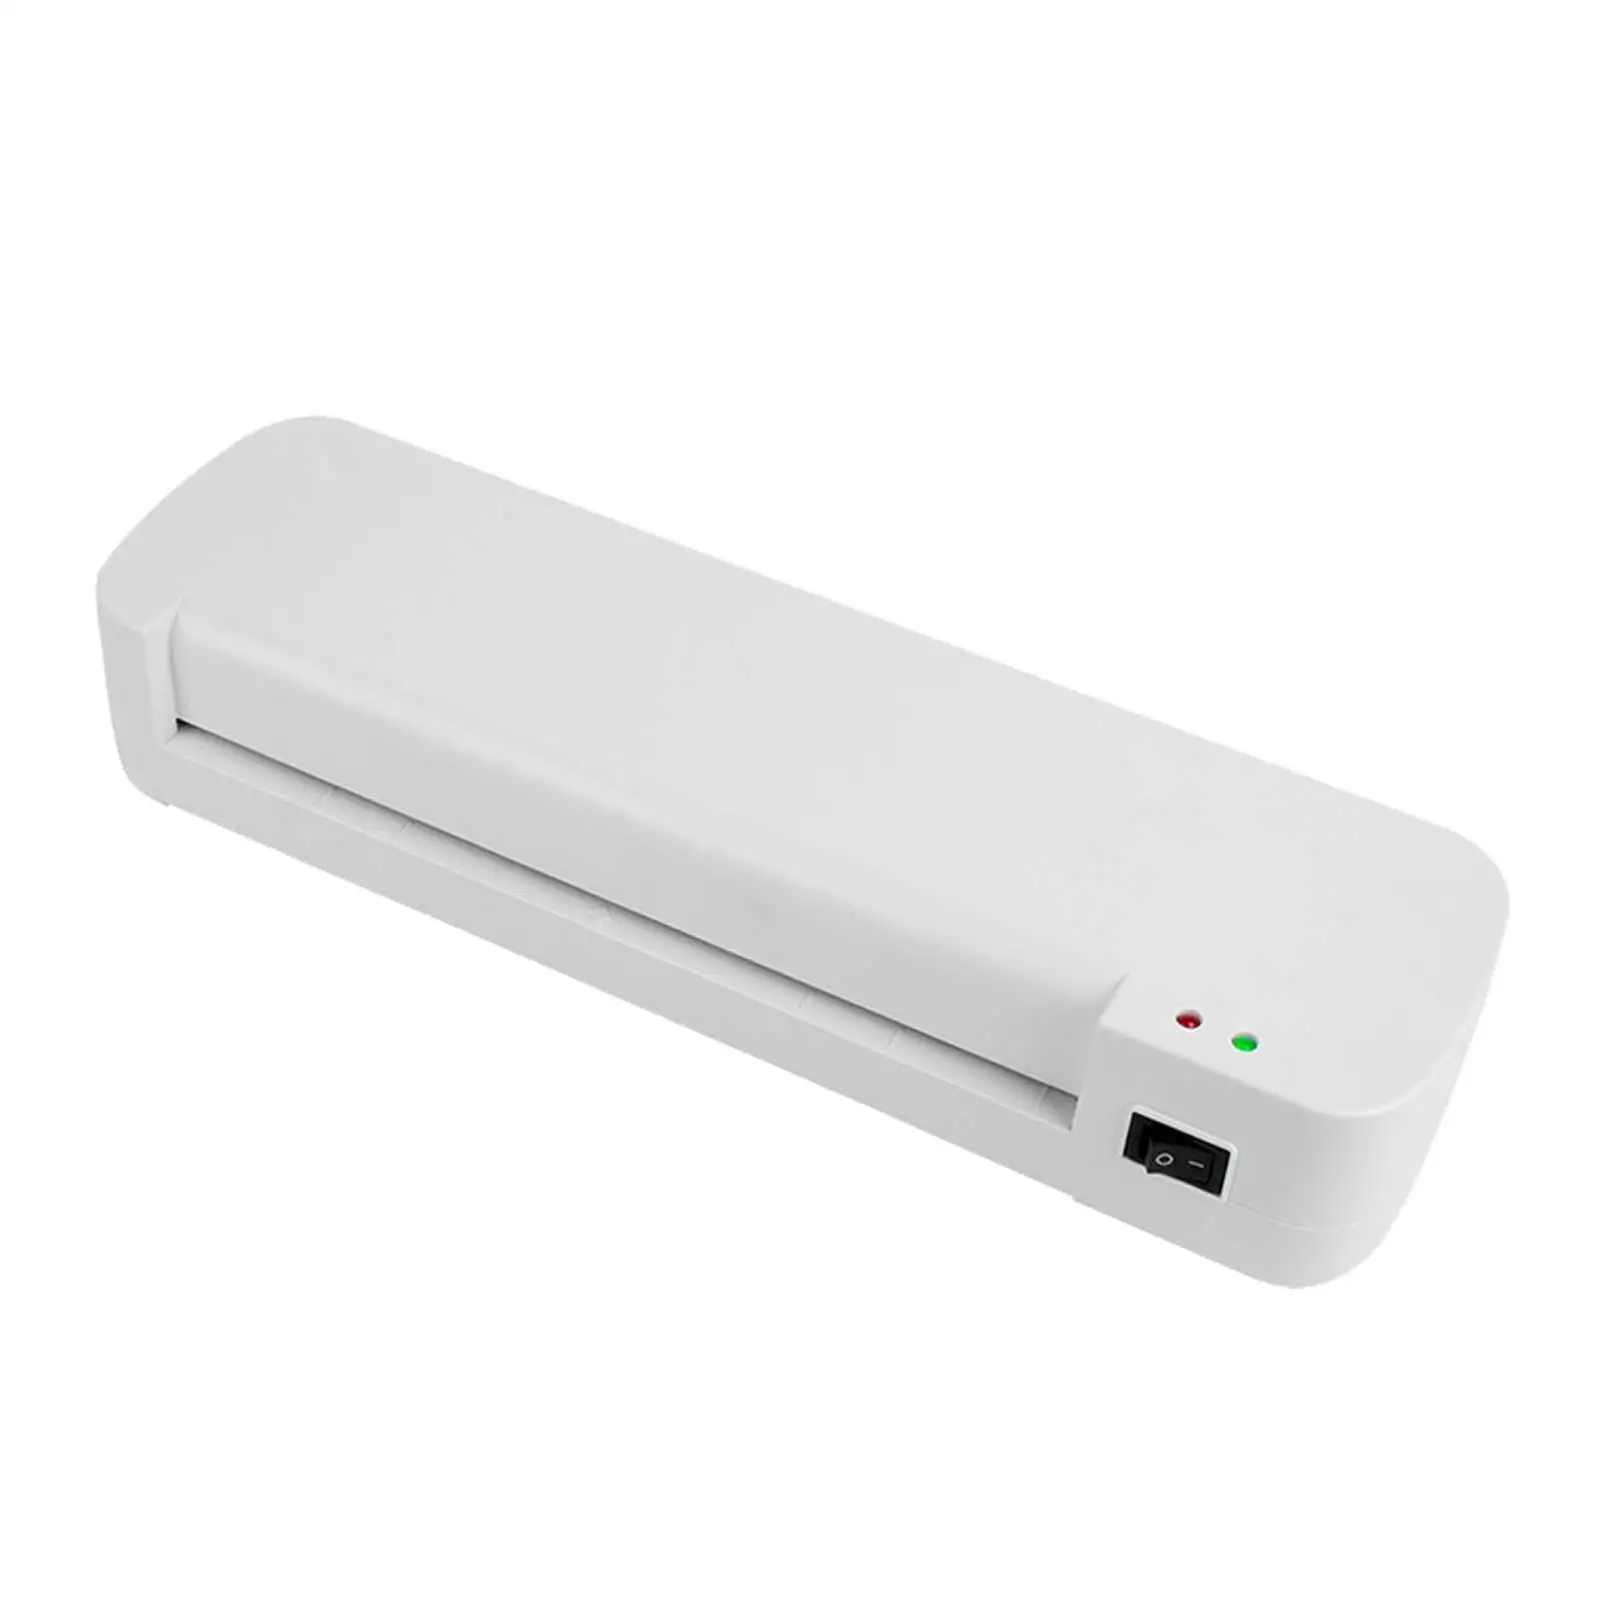 A4 Laminator Portable 3-5 Minutes Warm up Lamination Machine Personal Laminator for Household Home School Sealing Photo Office